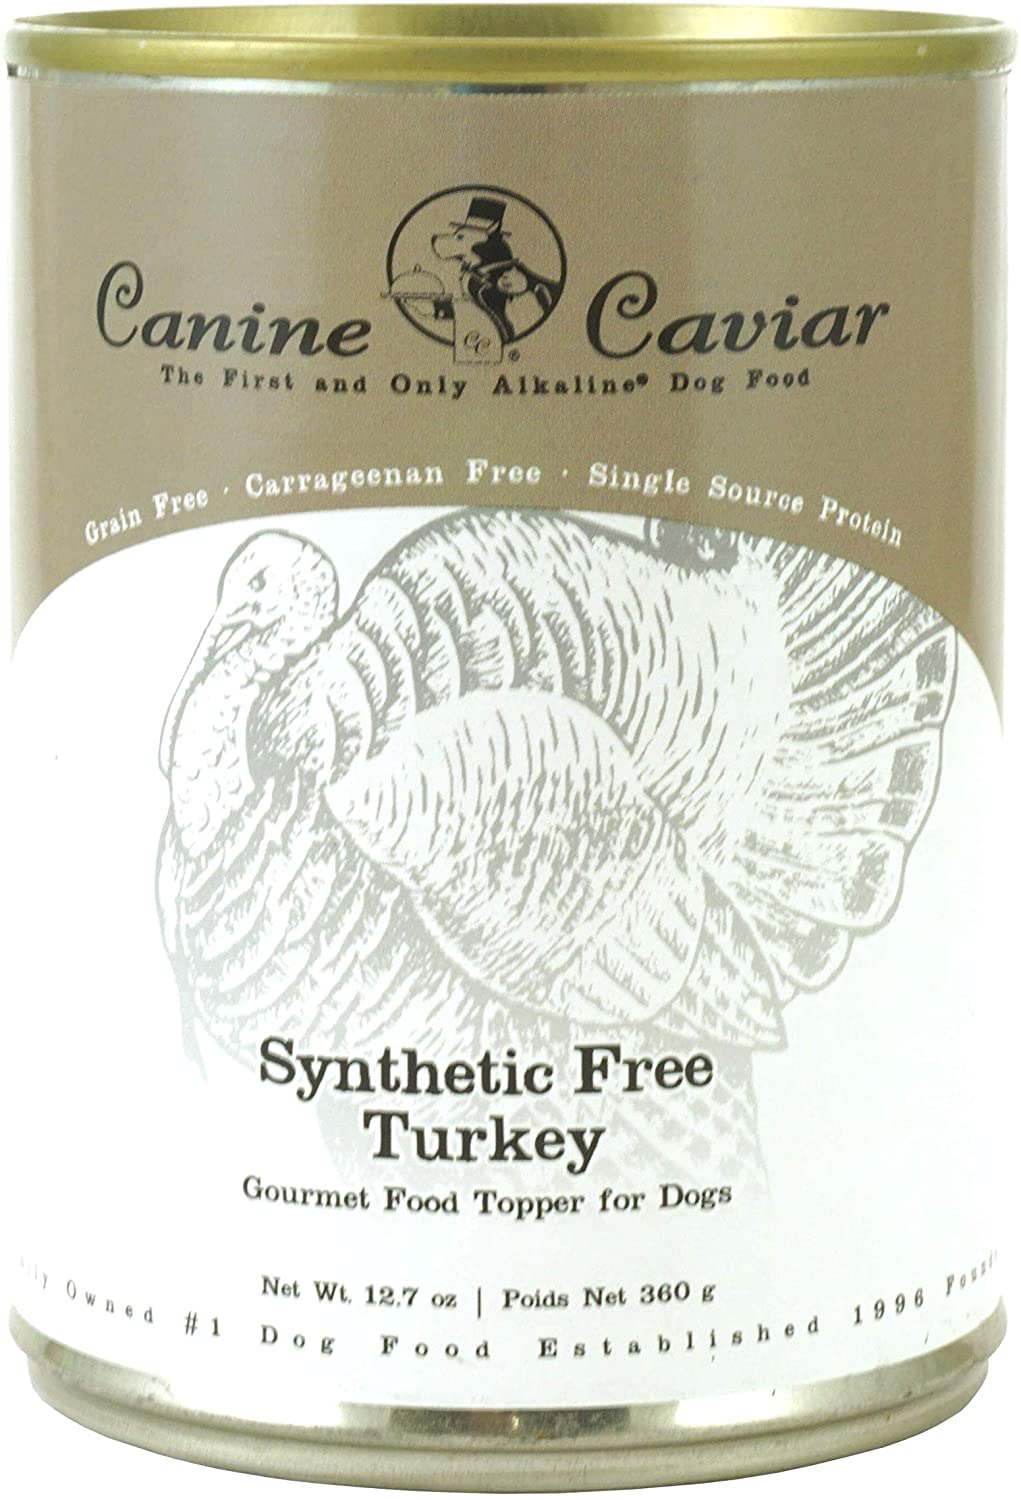 Canine Caviar Synthetic Free and Grain Free Turkey Canned Dog Food - 12.7 oz - Case of ...